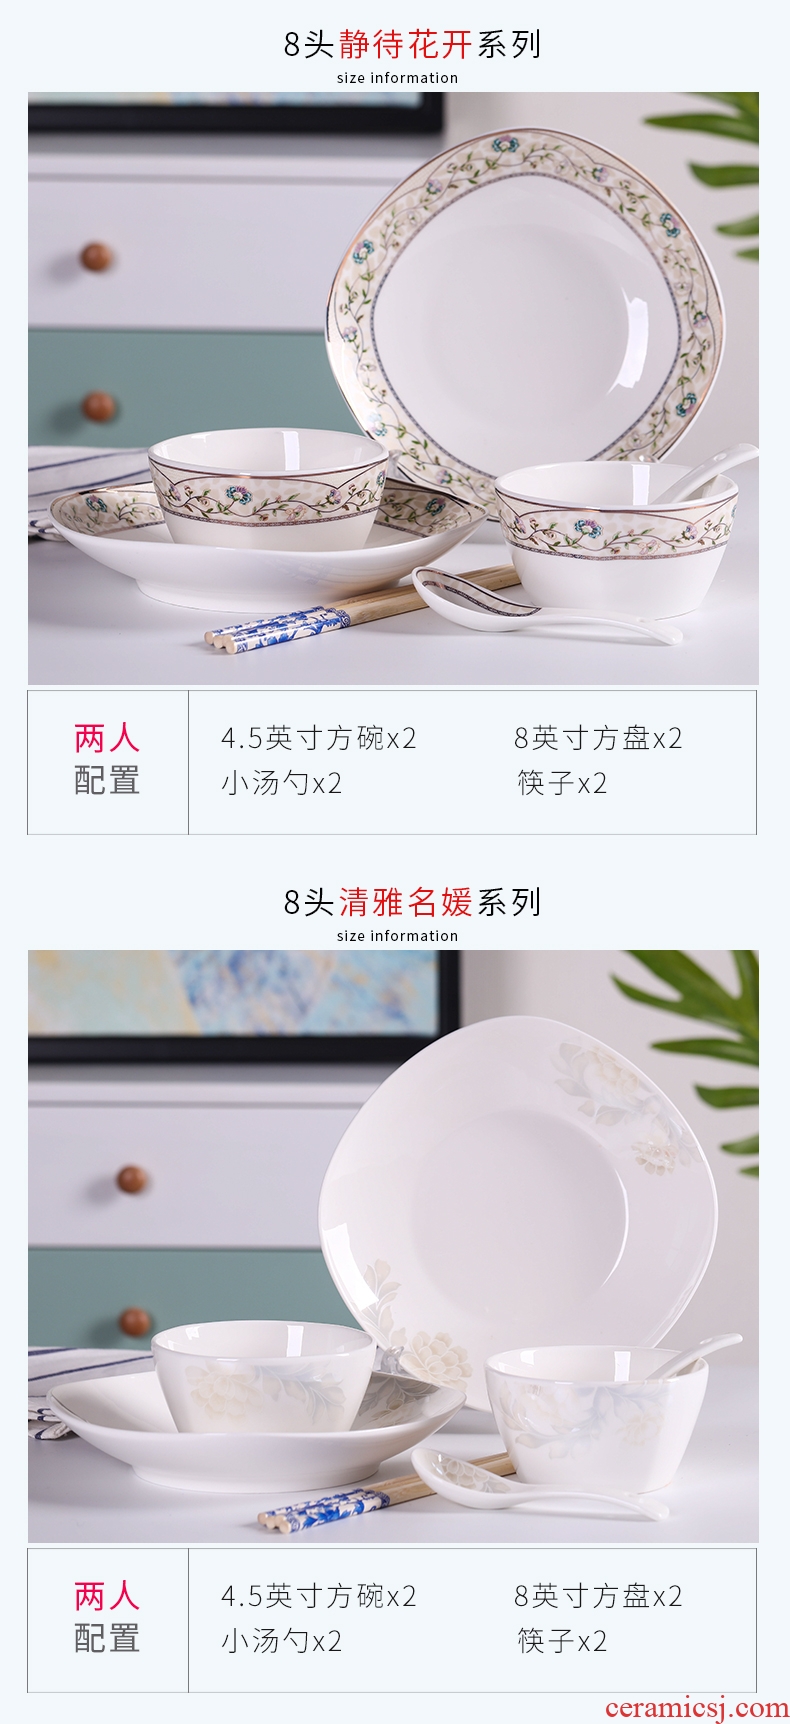 Ceramic dishes suit household contracted northern wind two food tableware suit single rice bowl chopsticks eat dish soup bowl spoon